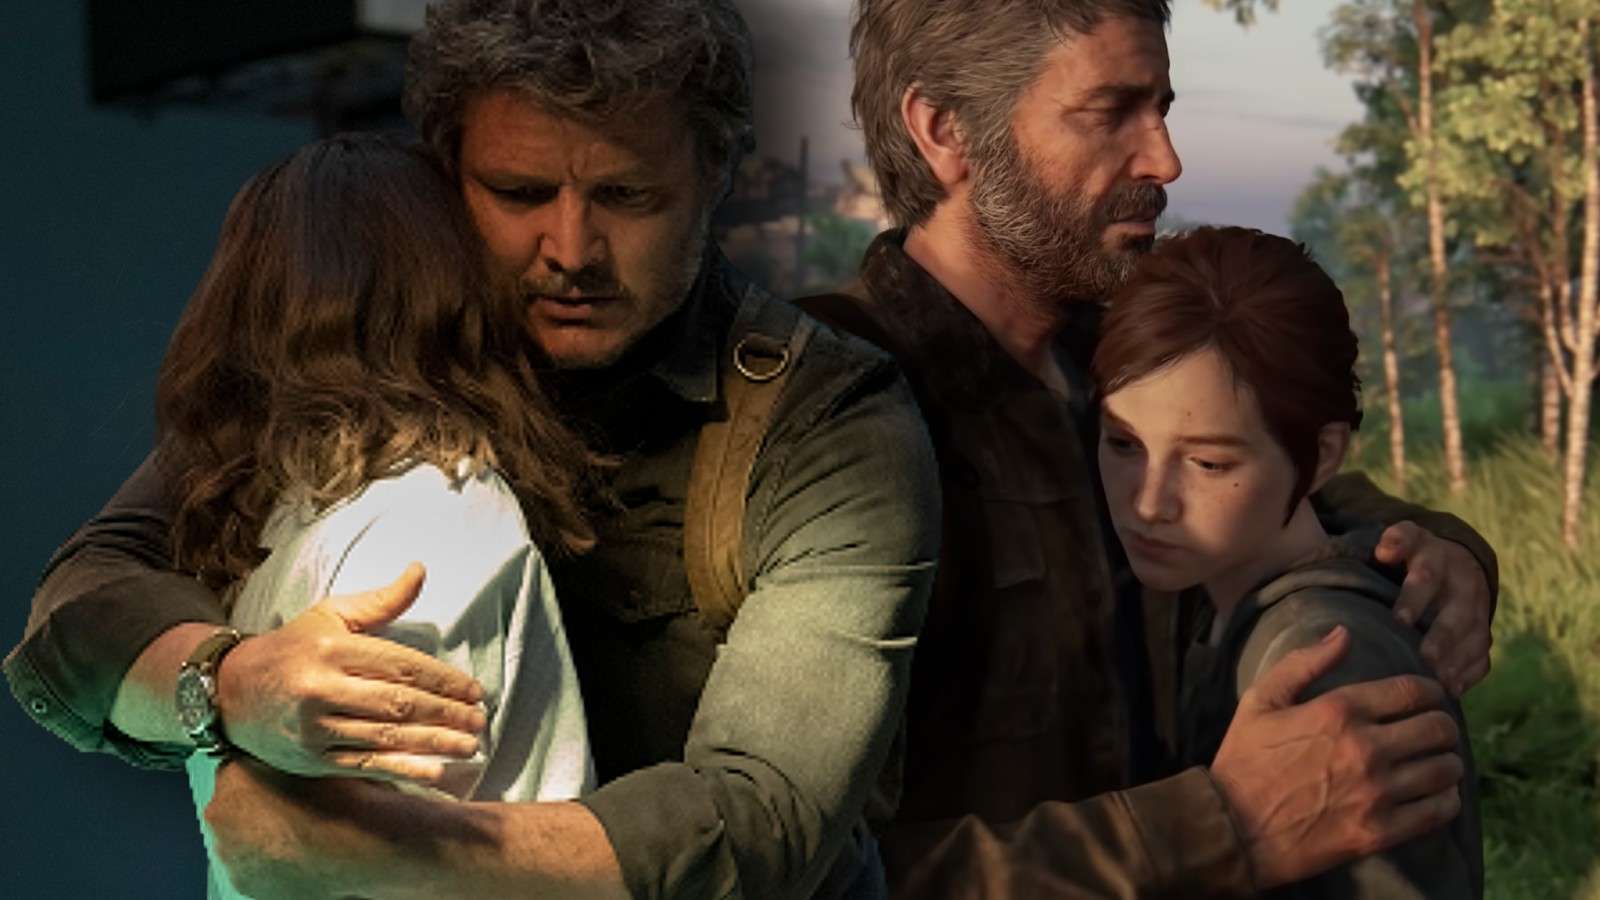 Joel and Ellie in The Last of Us show and Part 2 game